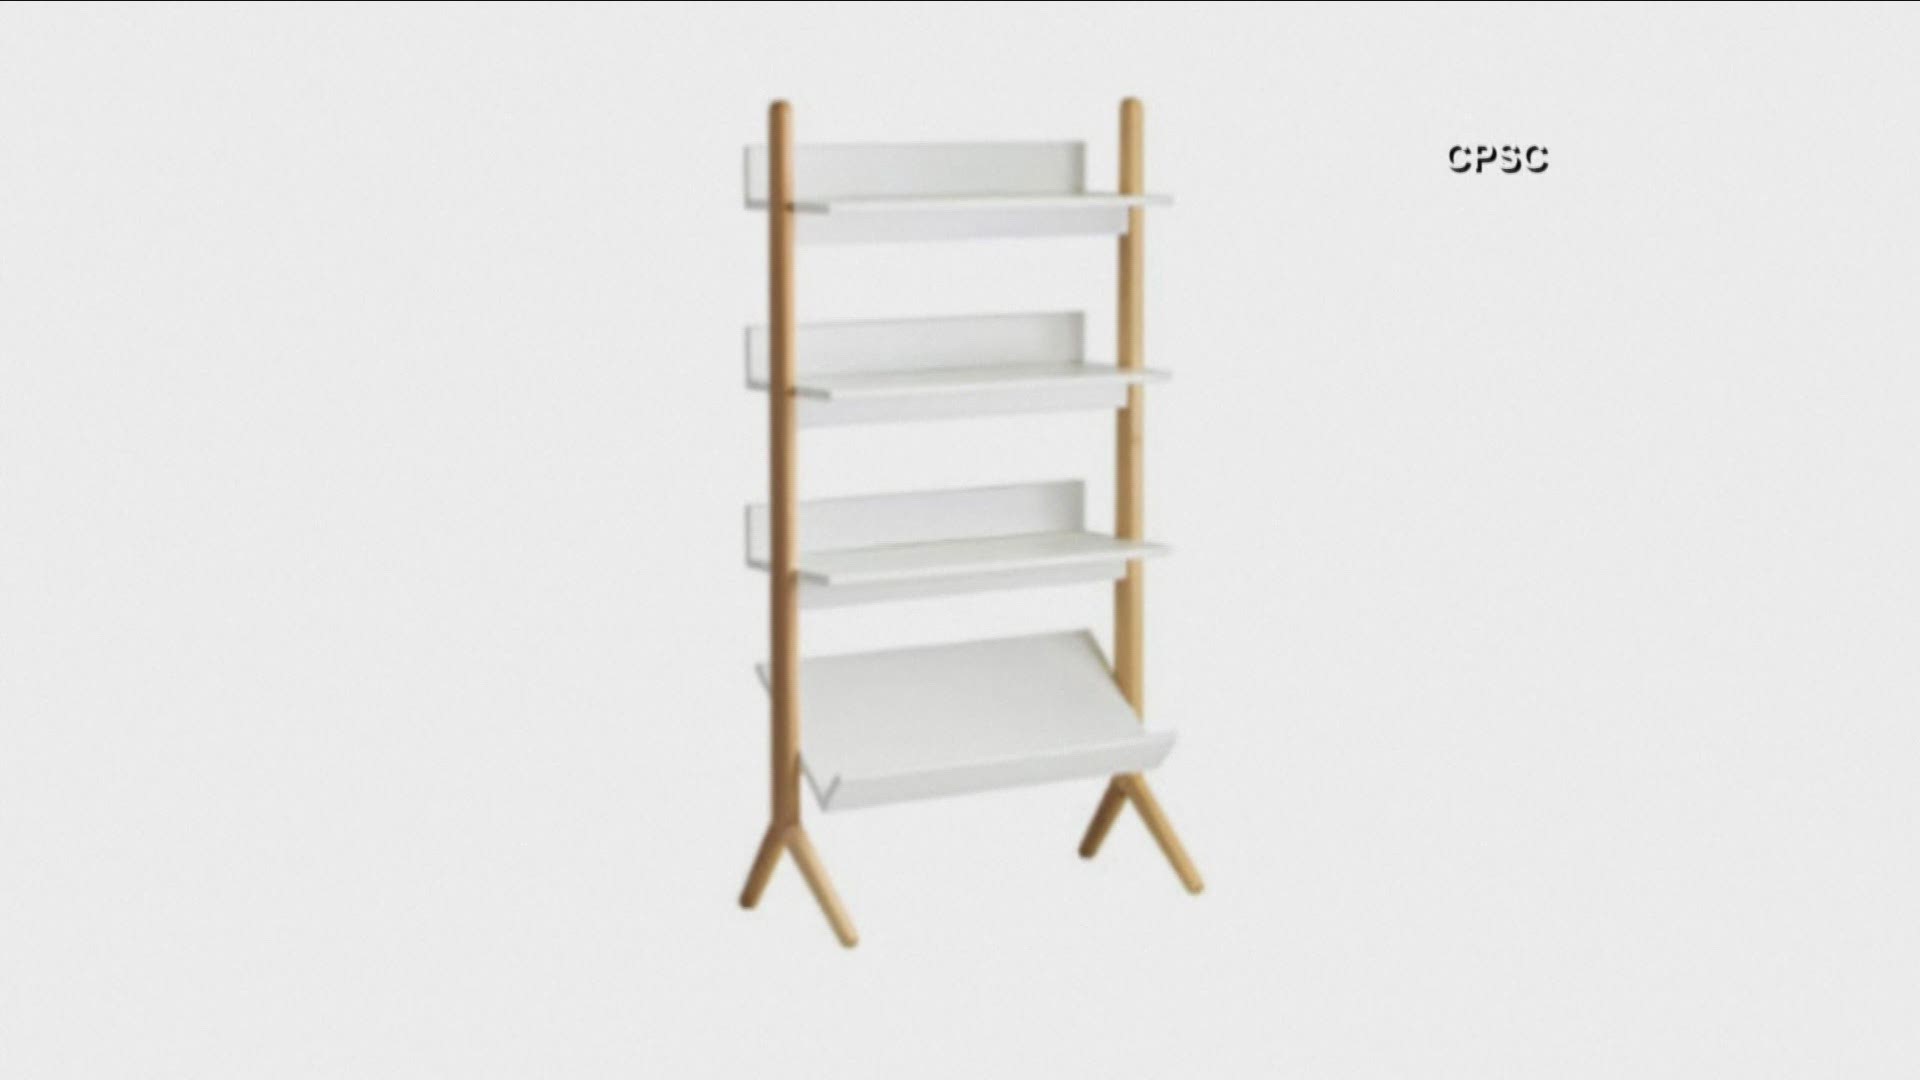 A chair from Bed Bath & Beyond, as well as a bookcase from Crate and Barrel have been recalled.